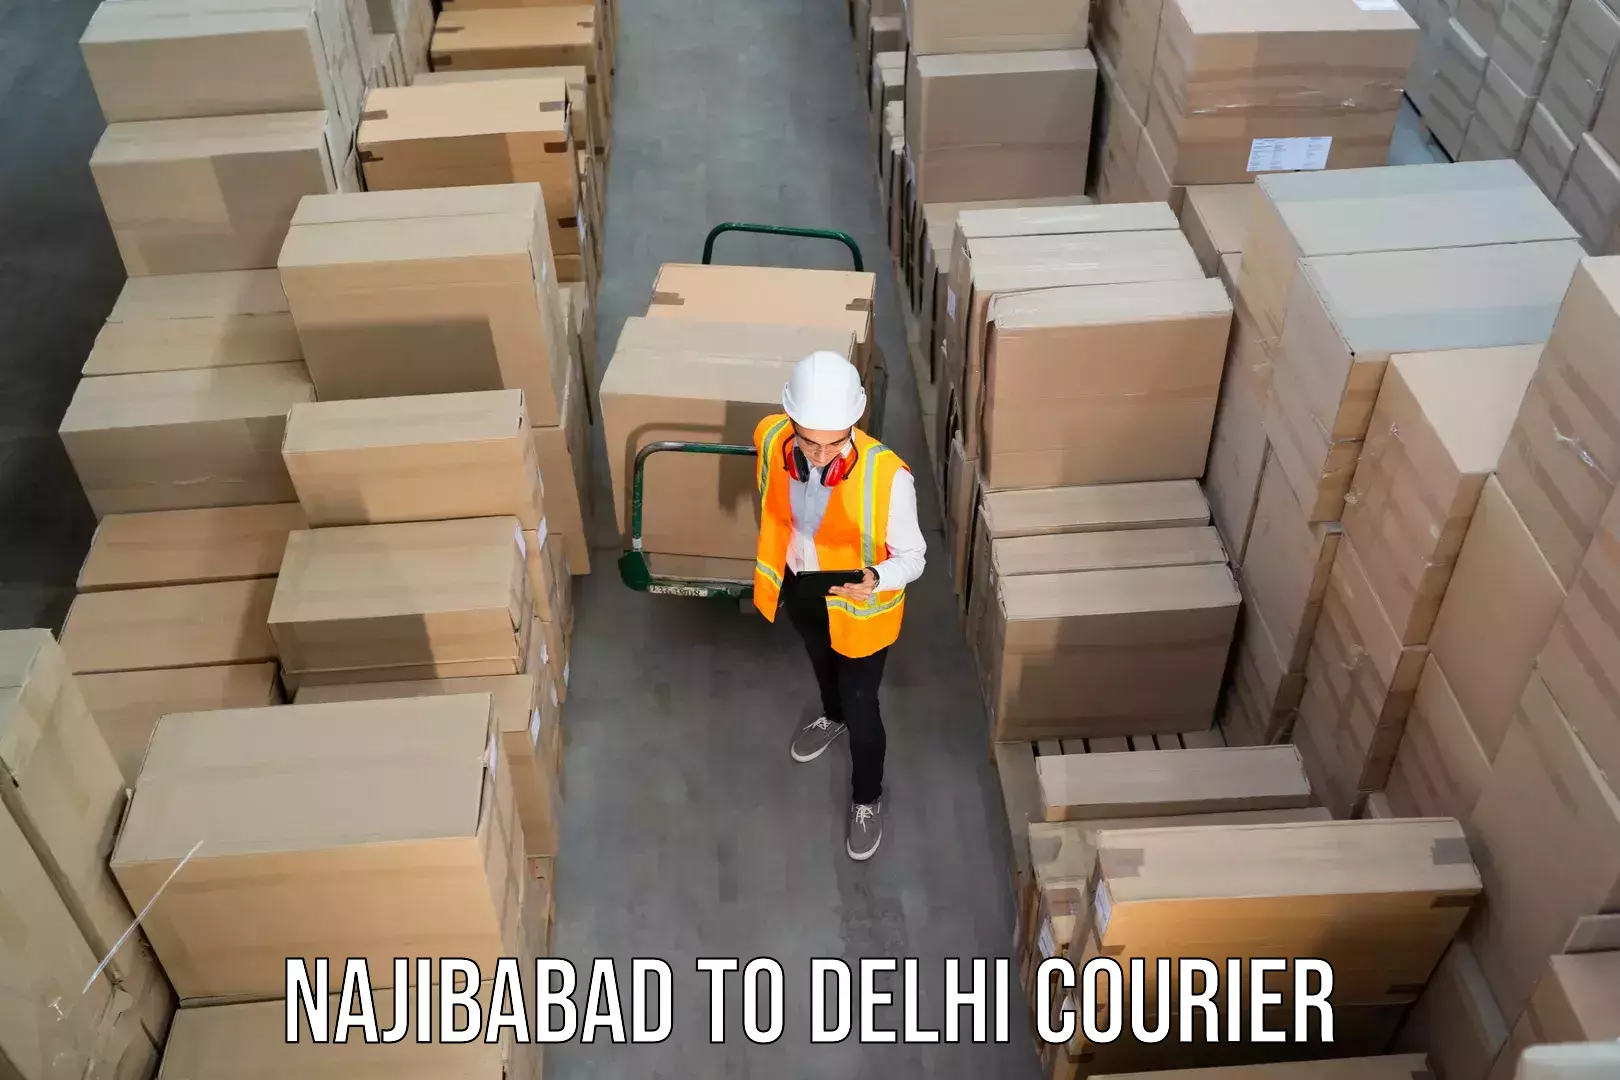 24-hour courier service Najibabad to University of Delhi